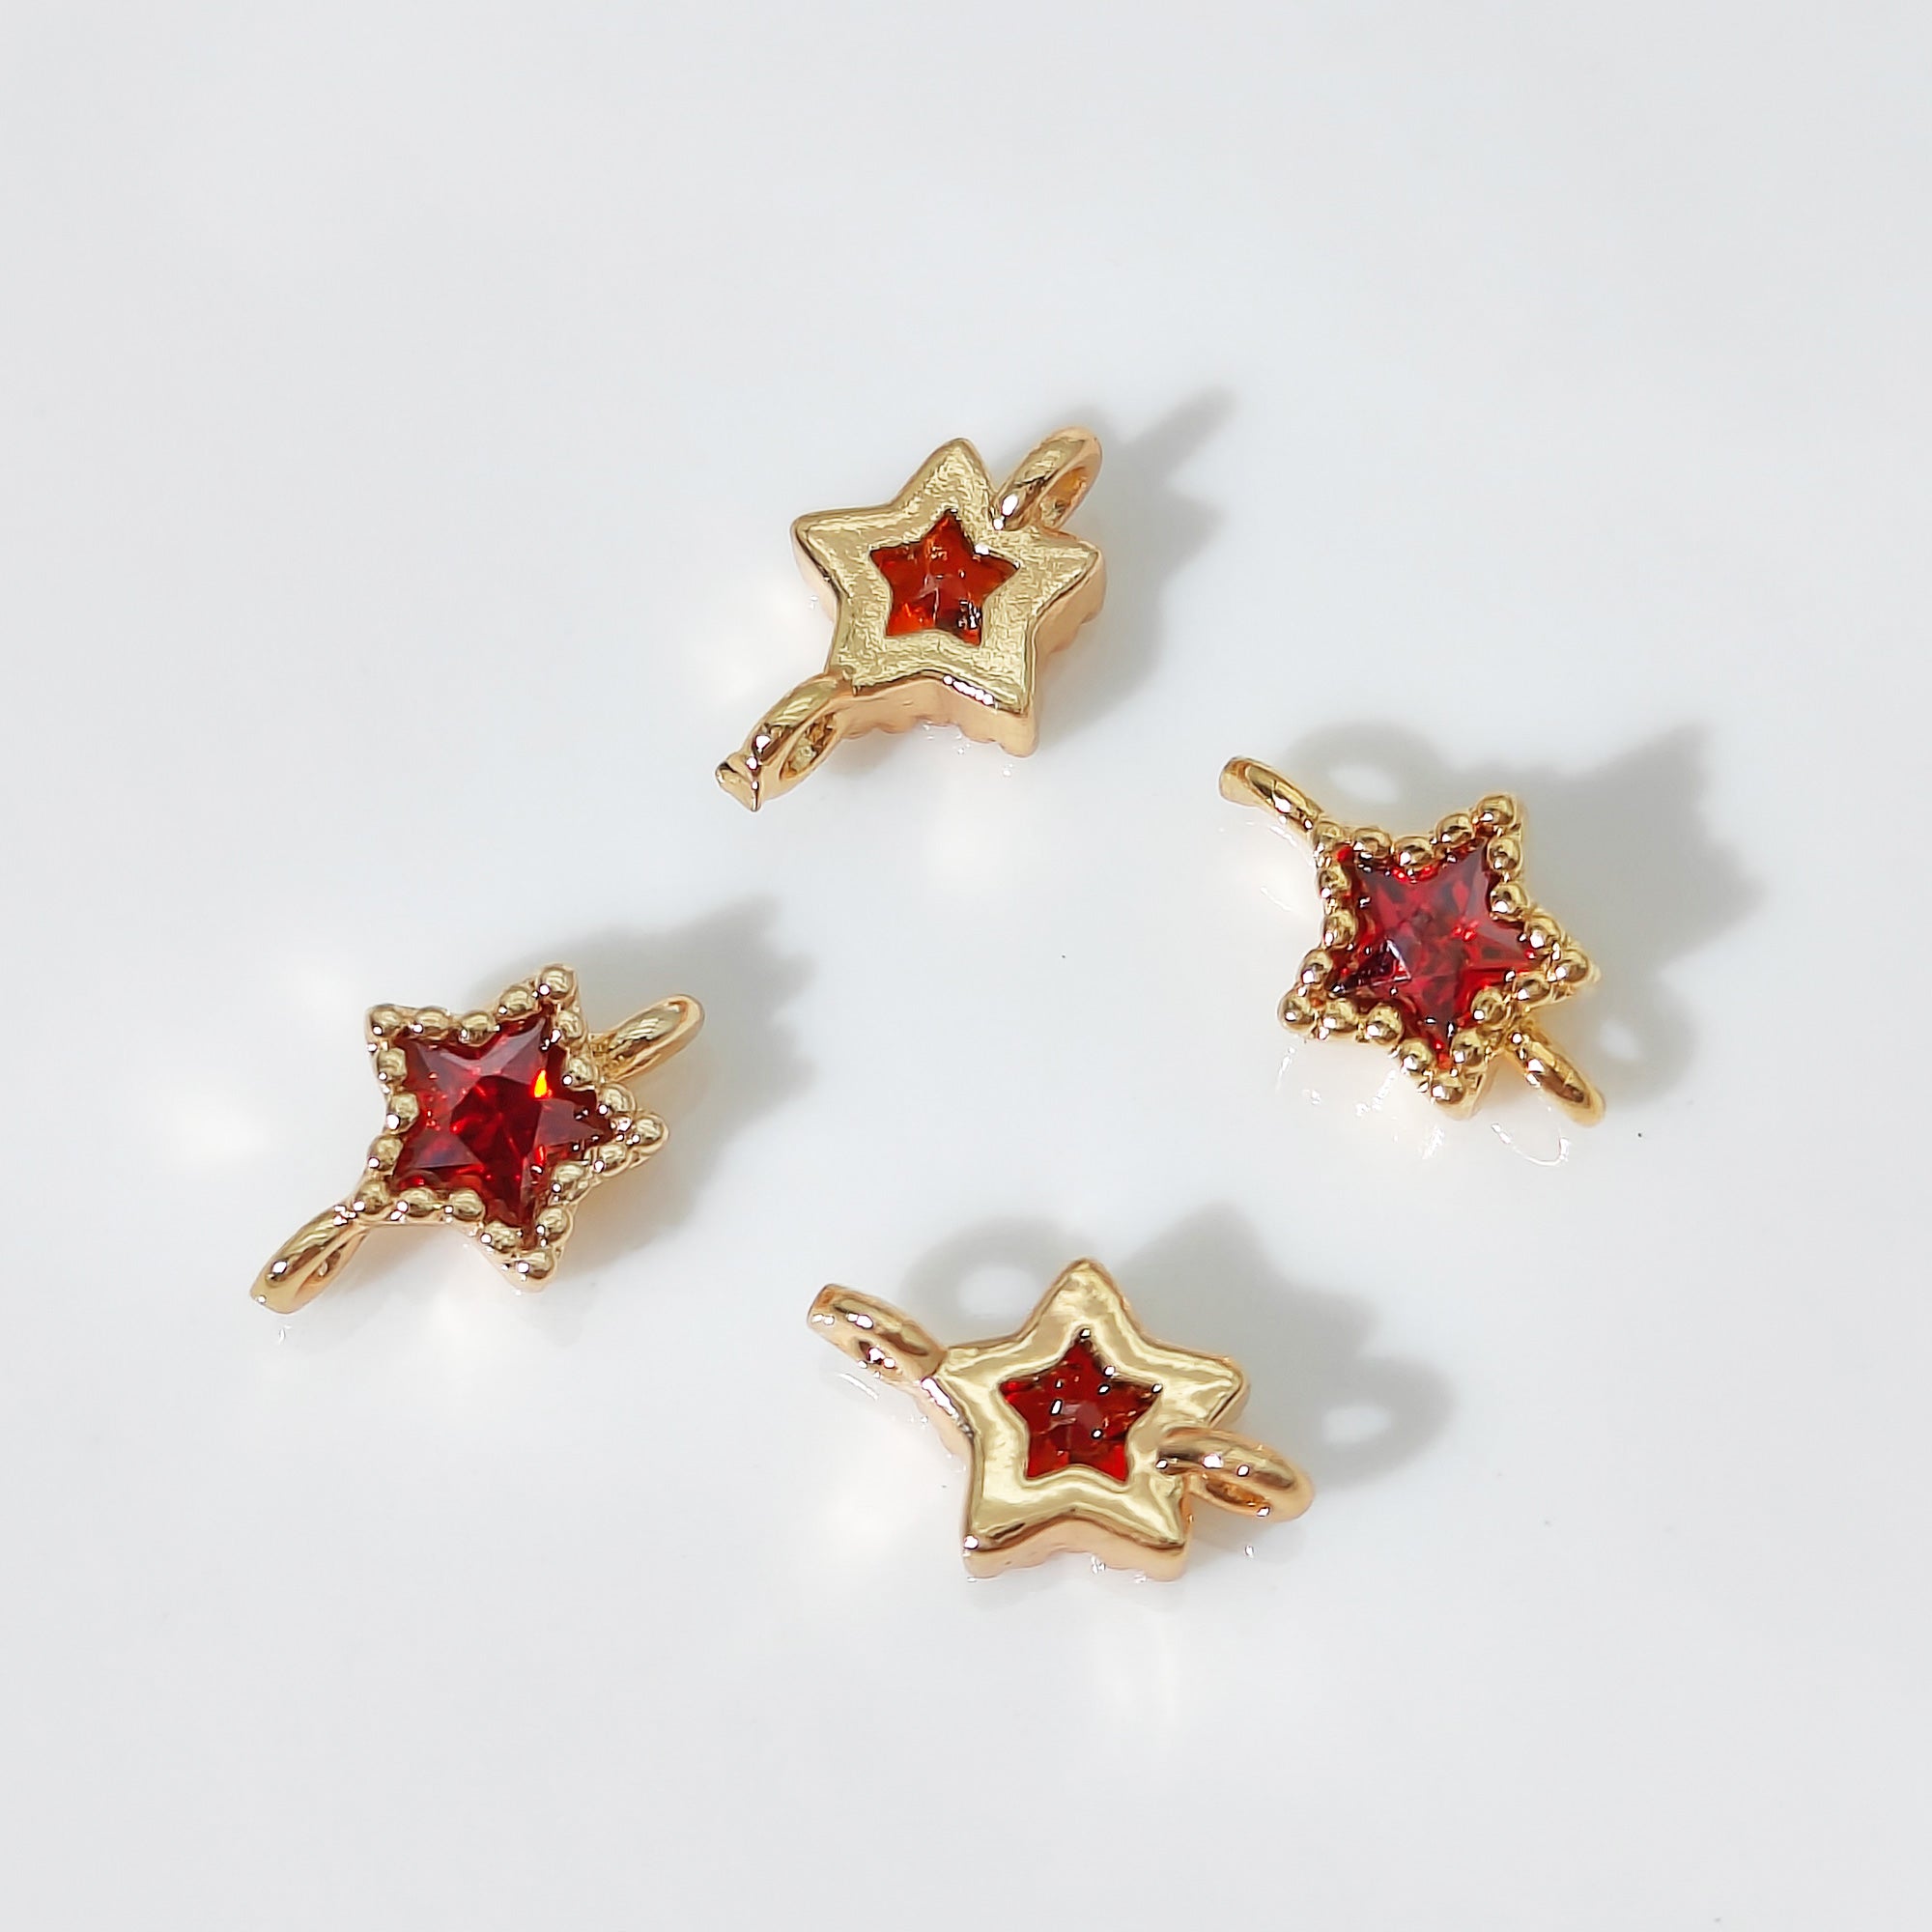 #Zircon Stars Gold Plating Jewelry Accessories For DIY